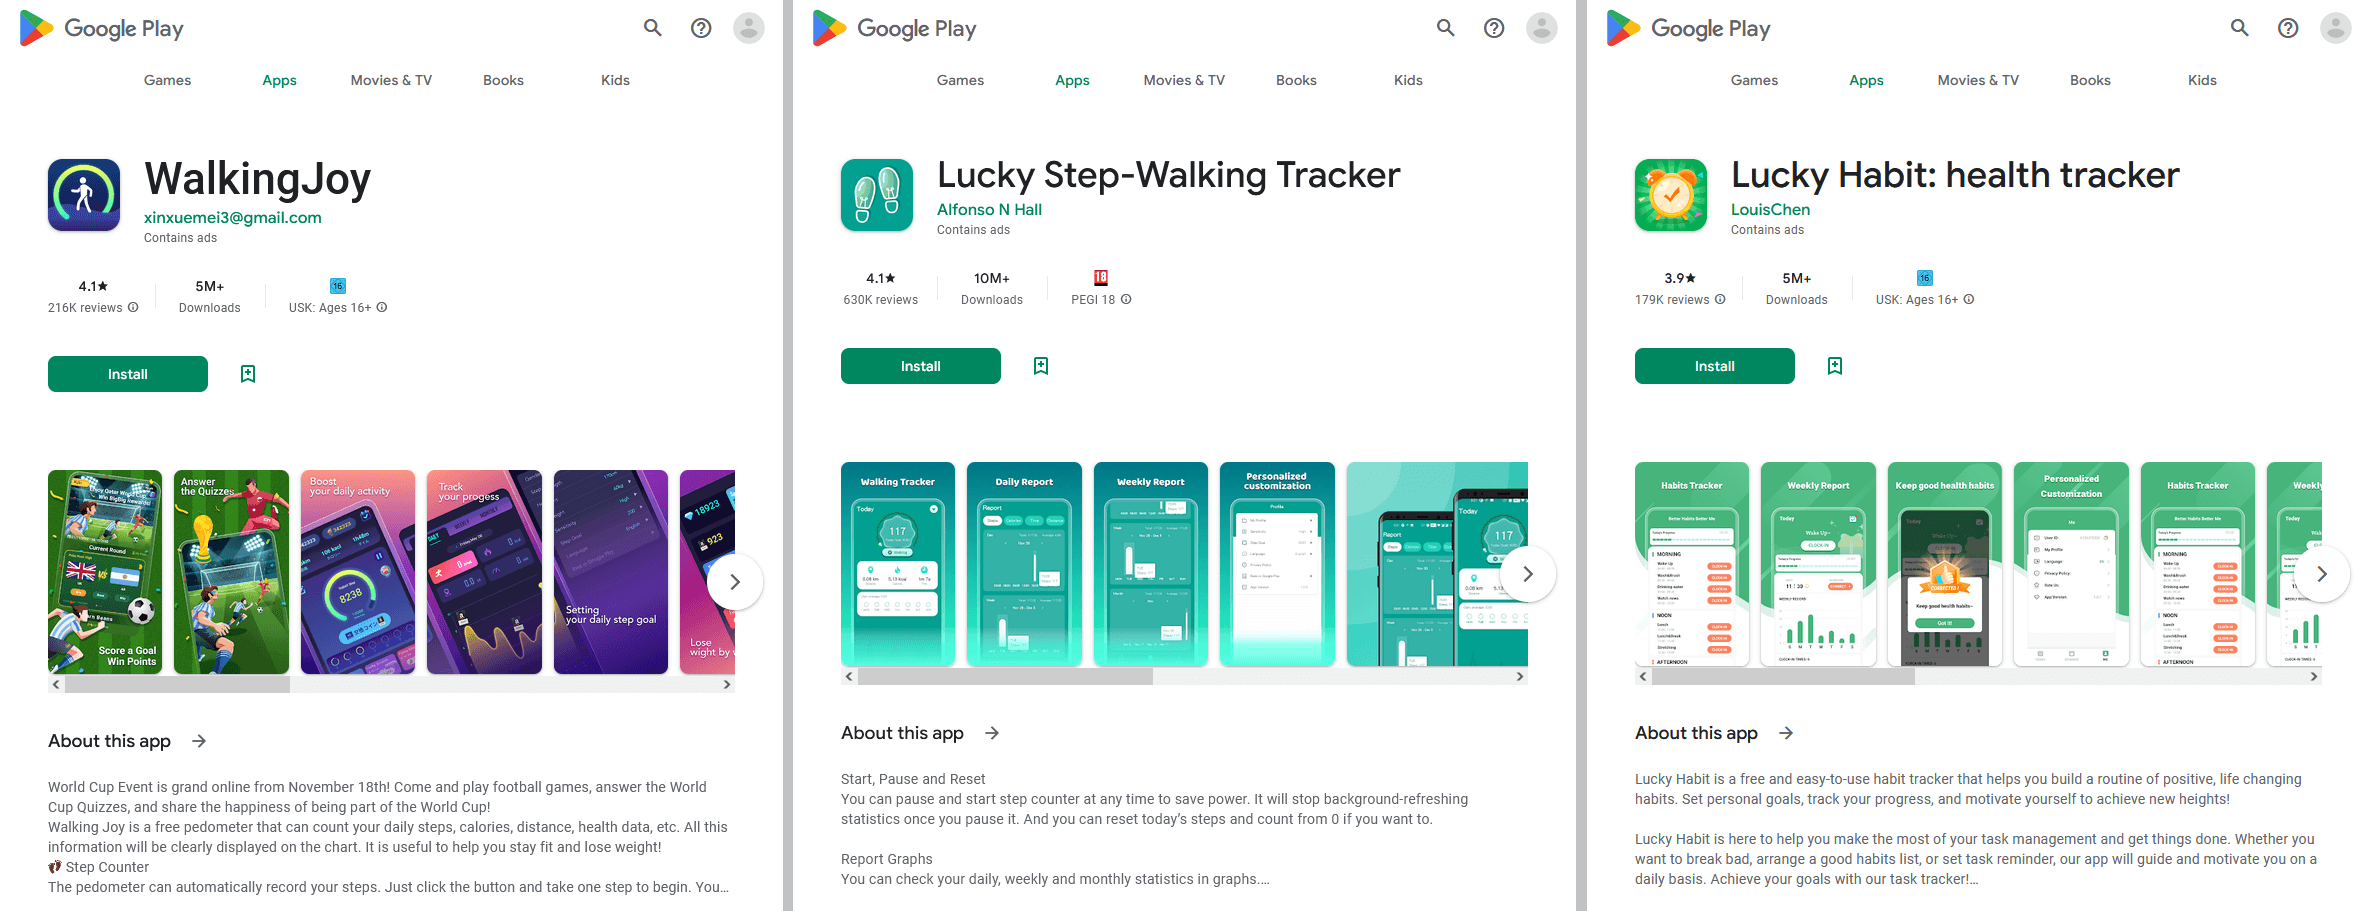 Scam apps on Google Play promising payouts for walking and viewing ads